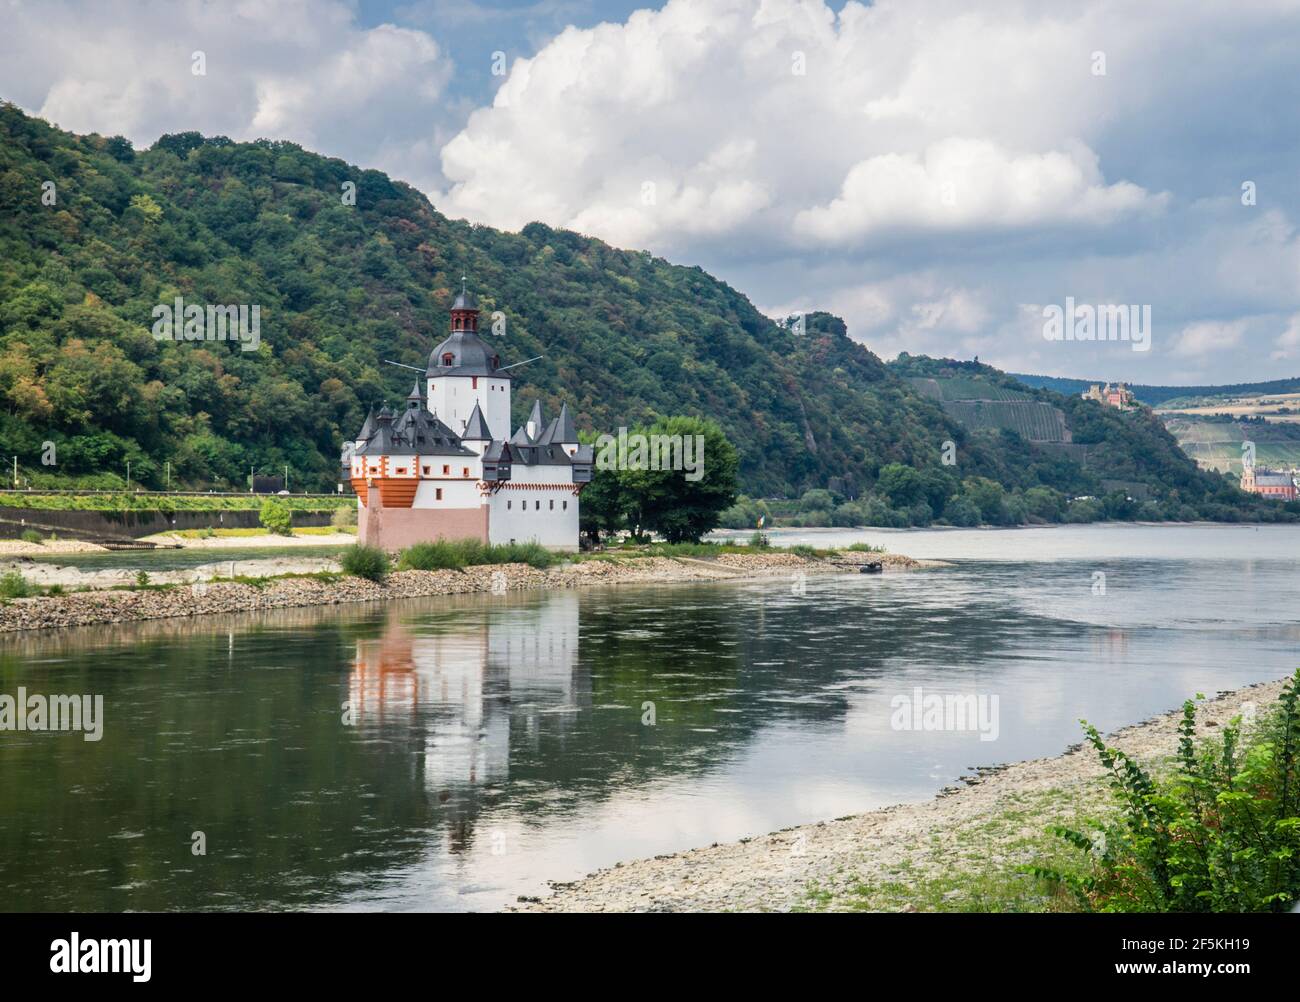 Pfalzgrafenstein Castle known as the Pfalz on Falkenau Island in the Rhine River at Kaub. From the 14th century until 1867 the castle functioned as a Stock Photo